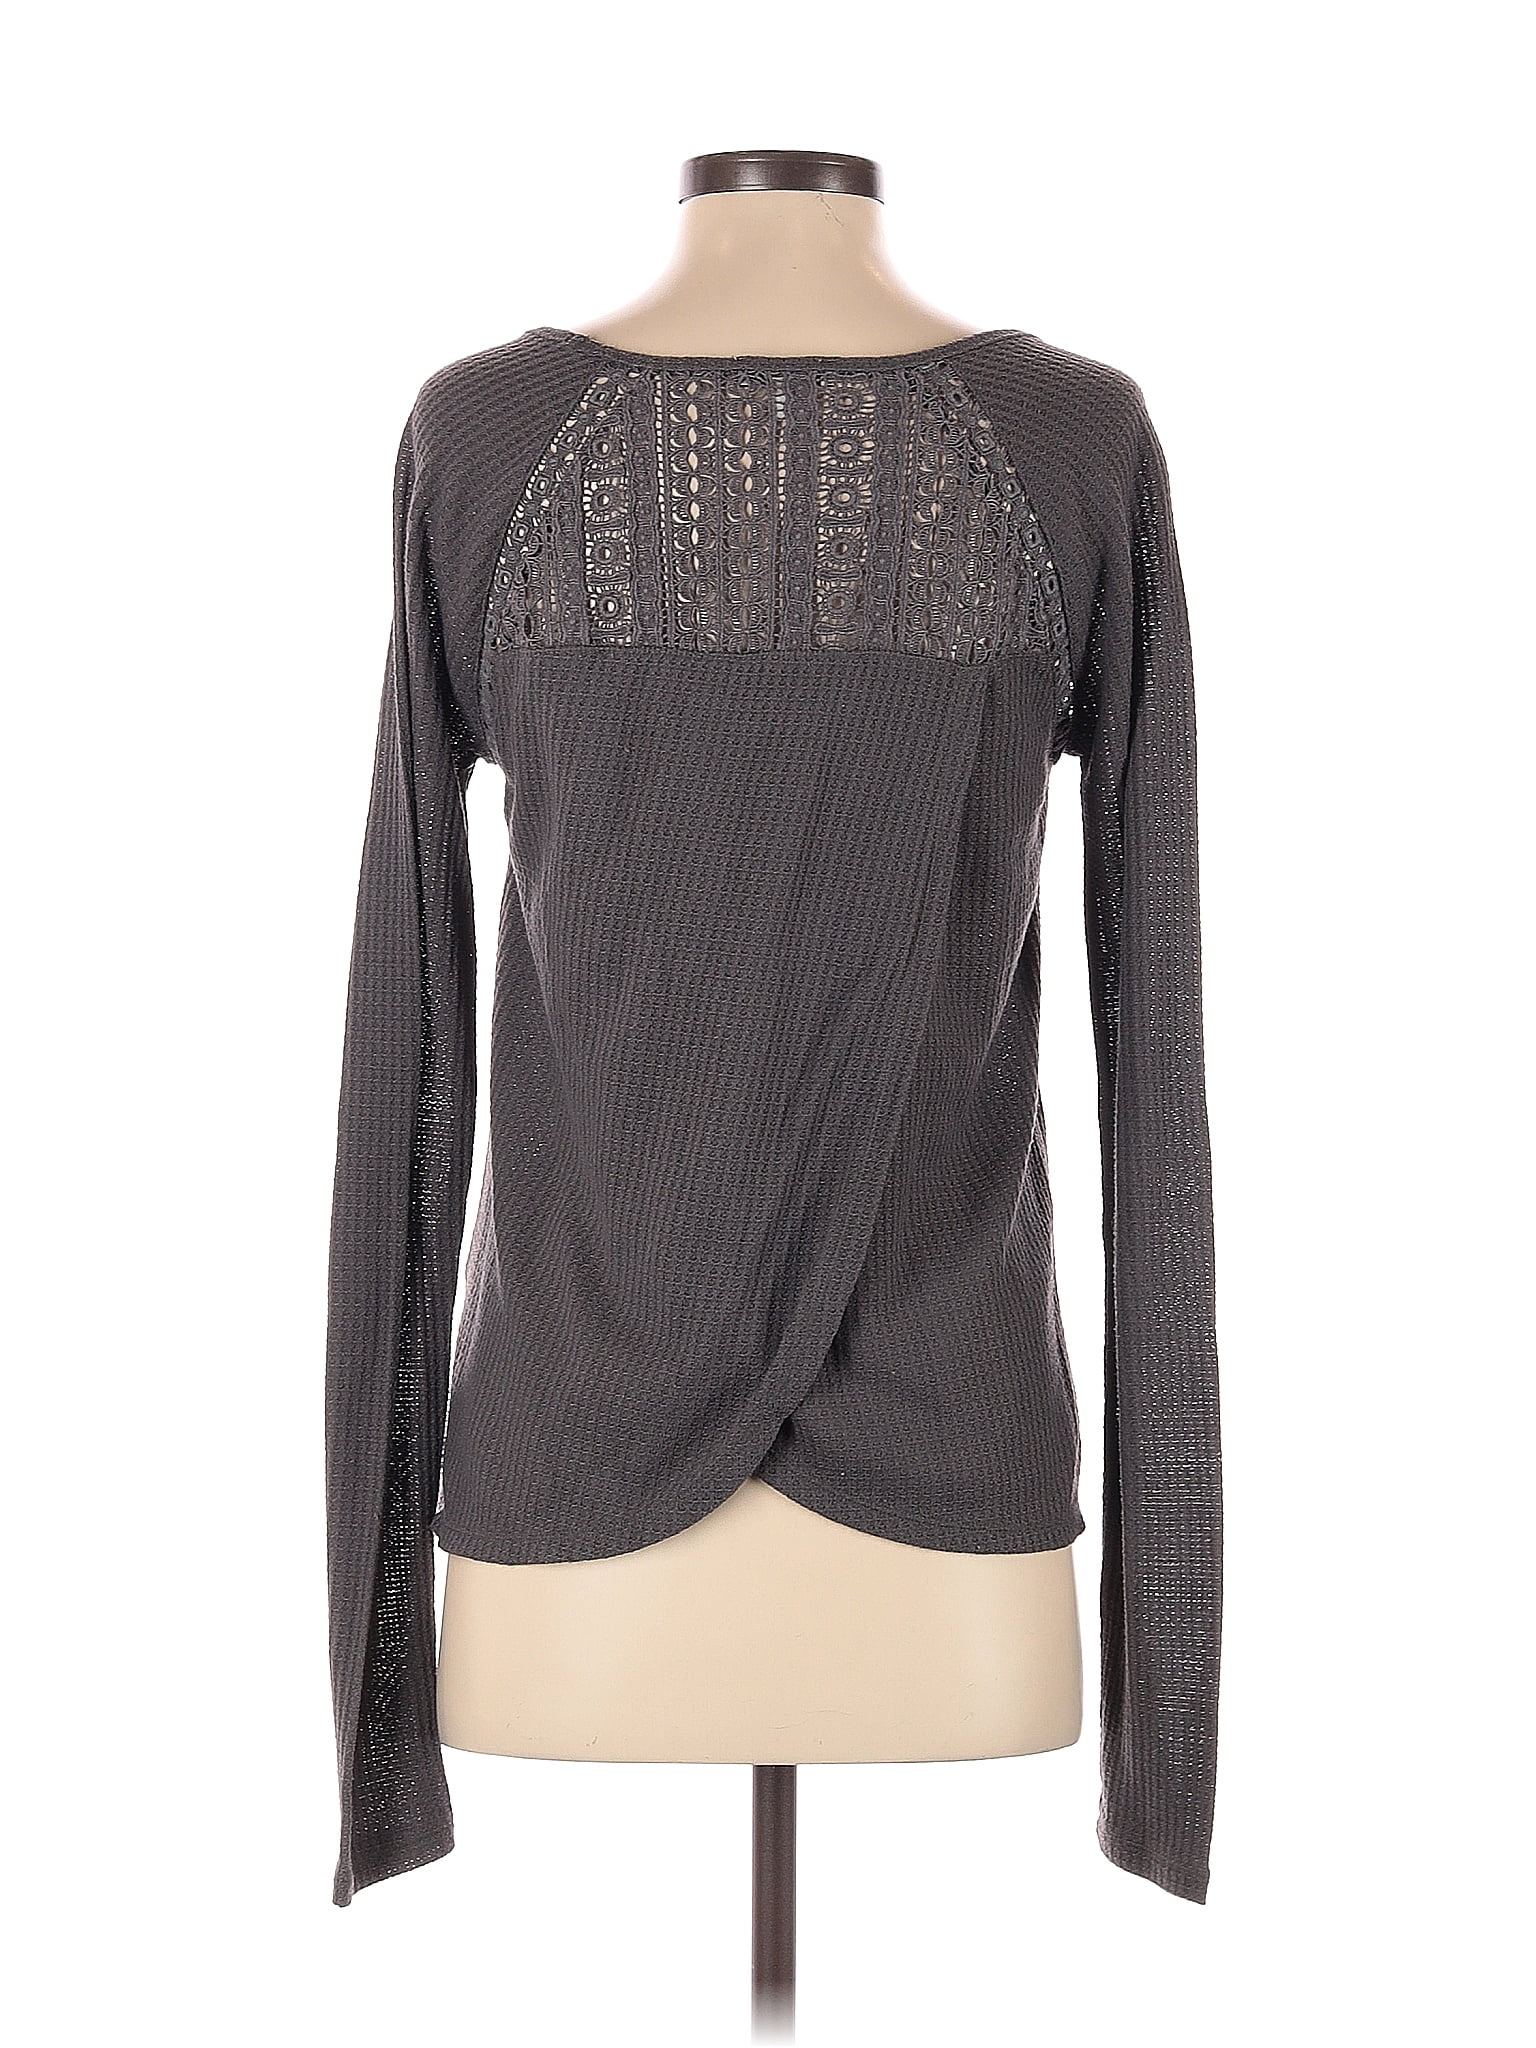 Lucky Brand Solid Gray Thermal Top Size S - 67% off